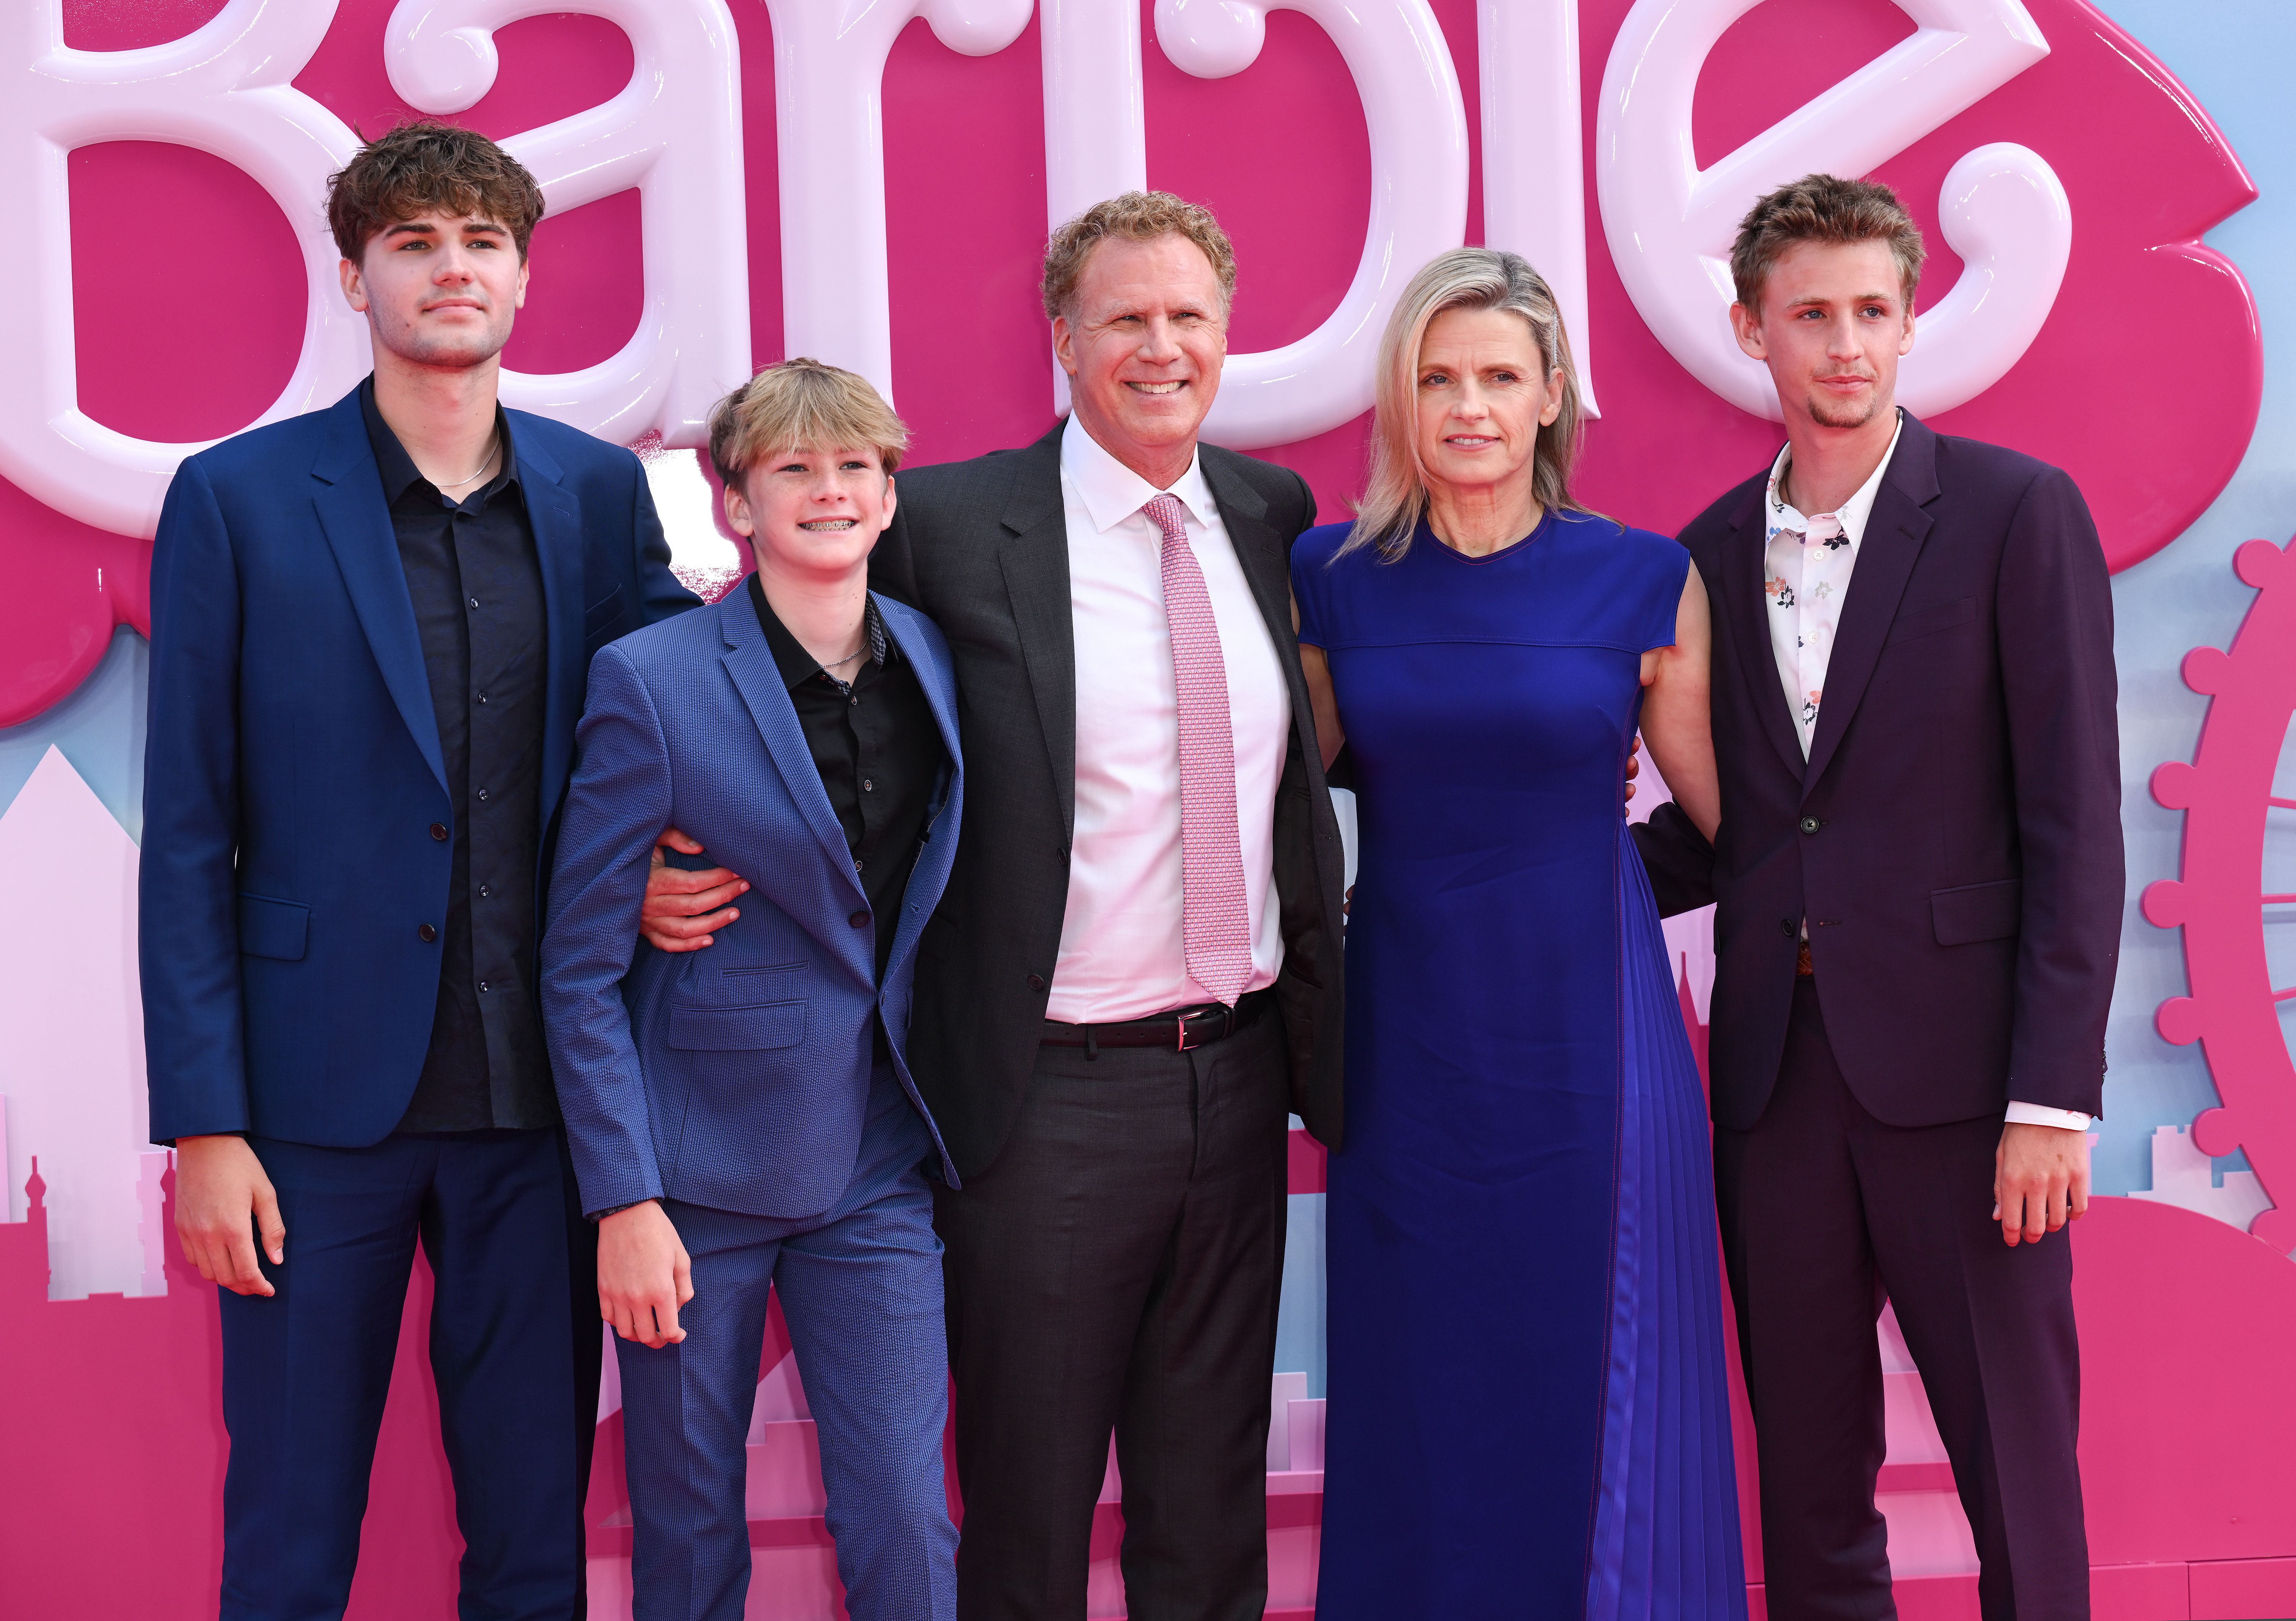 Will Ferrell and Viveca Paulin with their children Mattias, Axel and Magnus in London in 2023 | Source: Getty Images